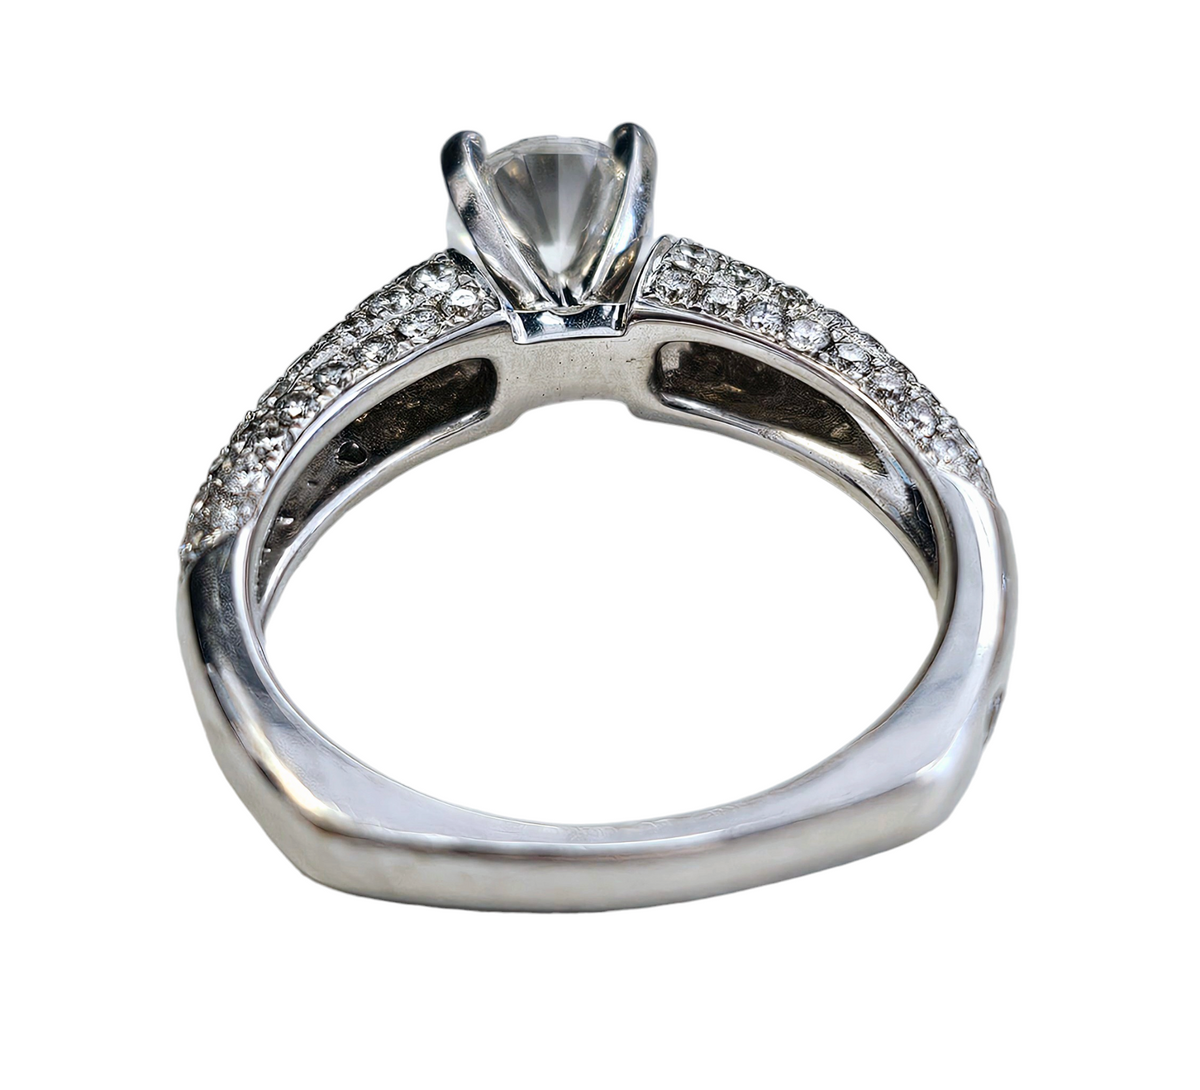 0.81 CT Diamond Engagement Ring with Pave Diamond setting made in 14-Karat White Gold